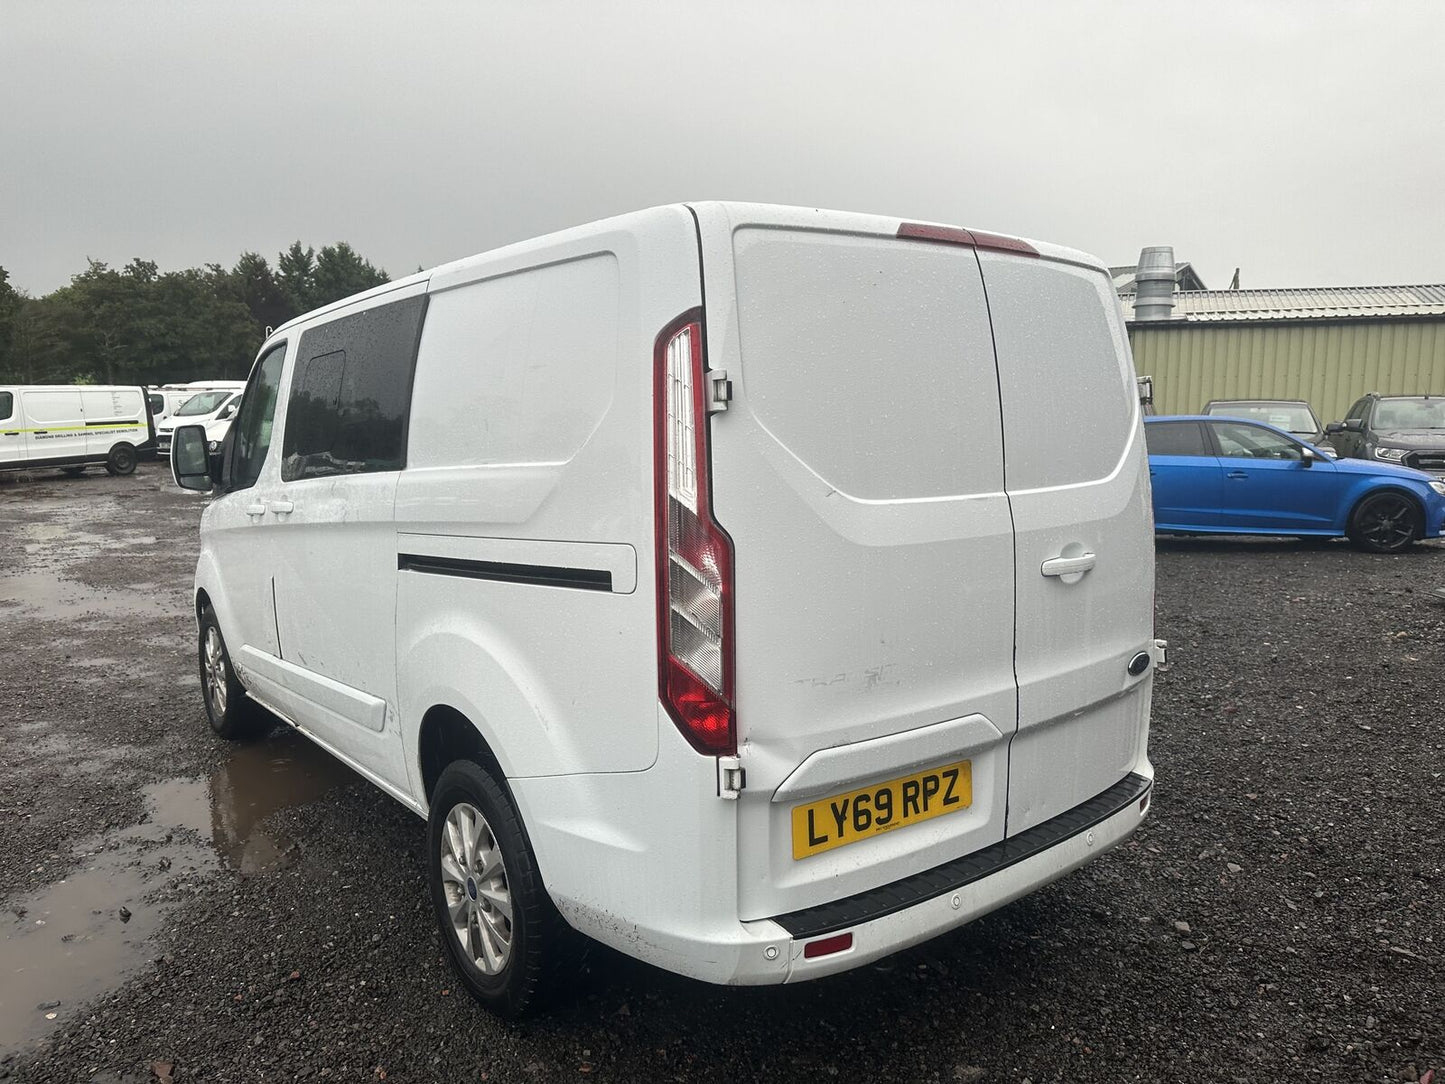 Bid on **(ONLY 64K MILEAGE)** 2020 FORD TRANSIT CUSTOM ECO LIMITED CREW CAB (NO VAT ON HAMMER)**- Buy &amp; Sell on Auction with EAMA Group